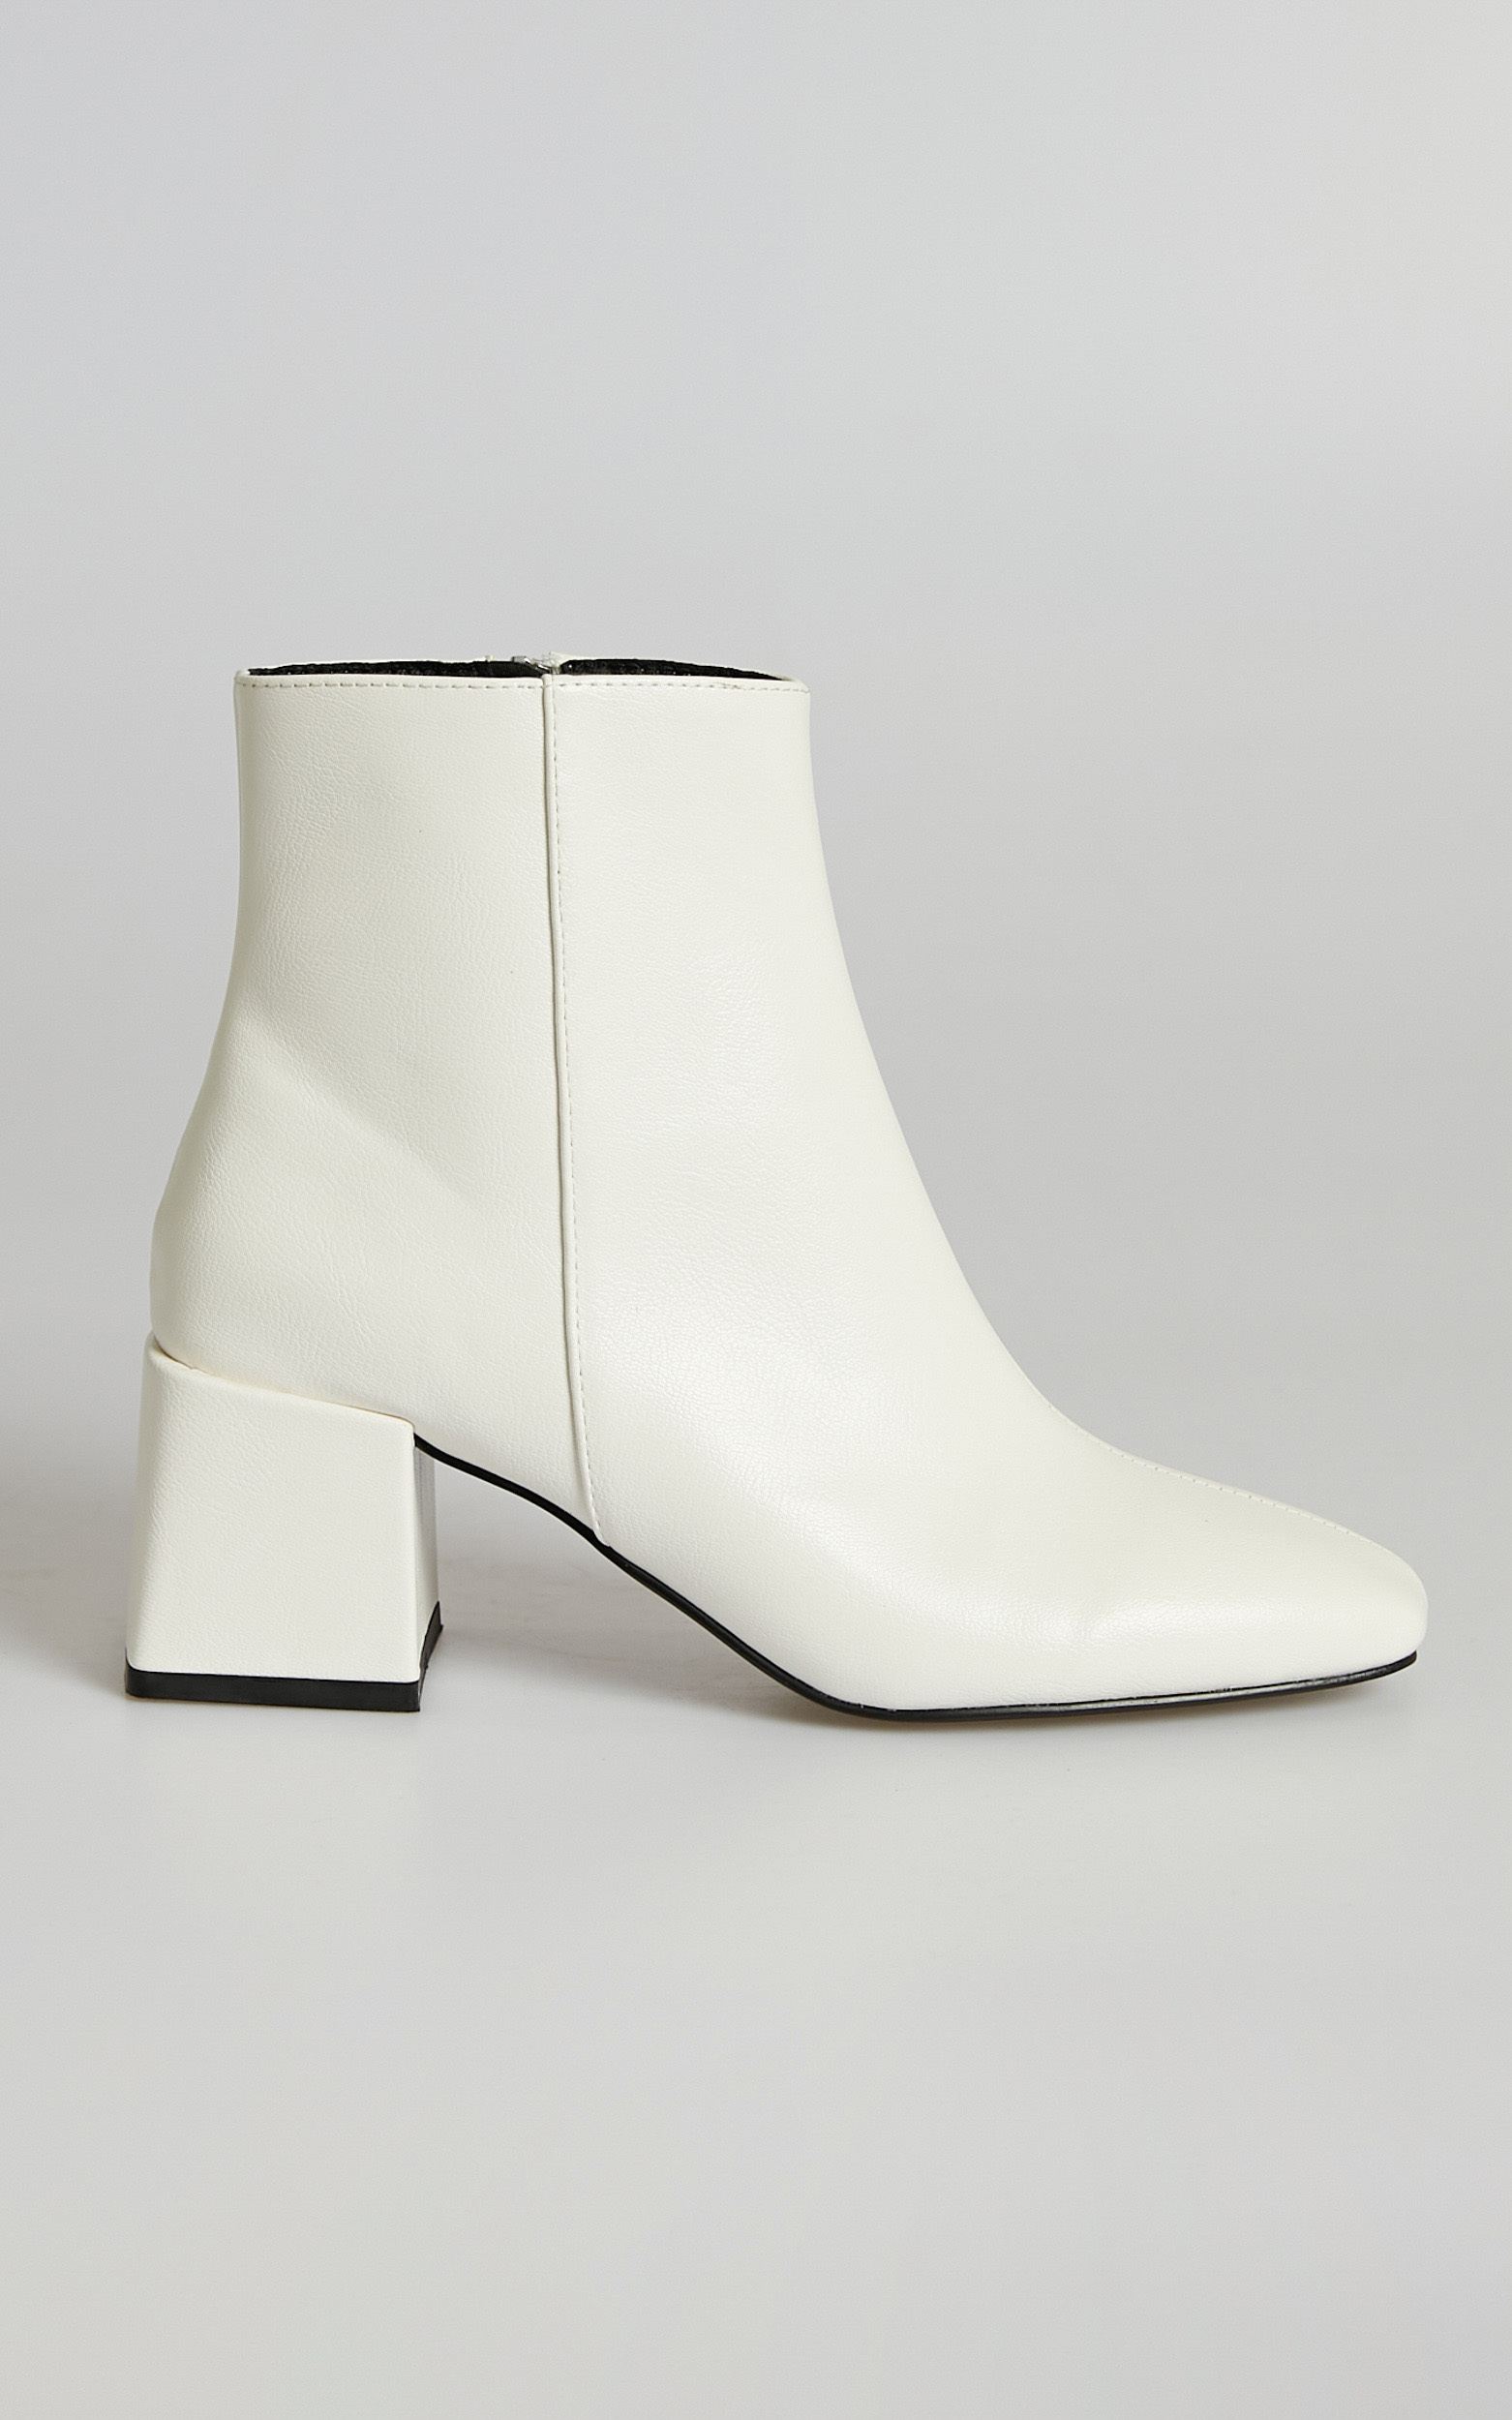 Therapy - Cole Boots in White - 05, WHT1, hi-res image number null